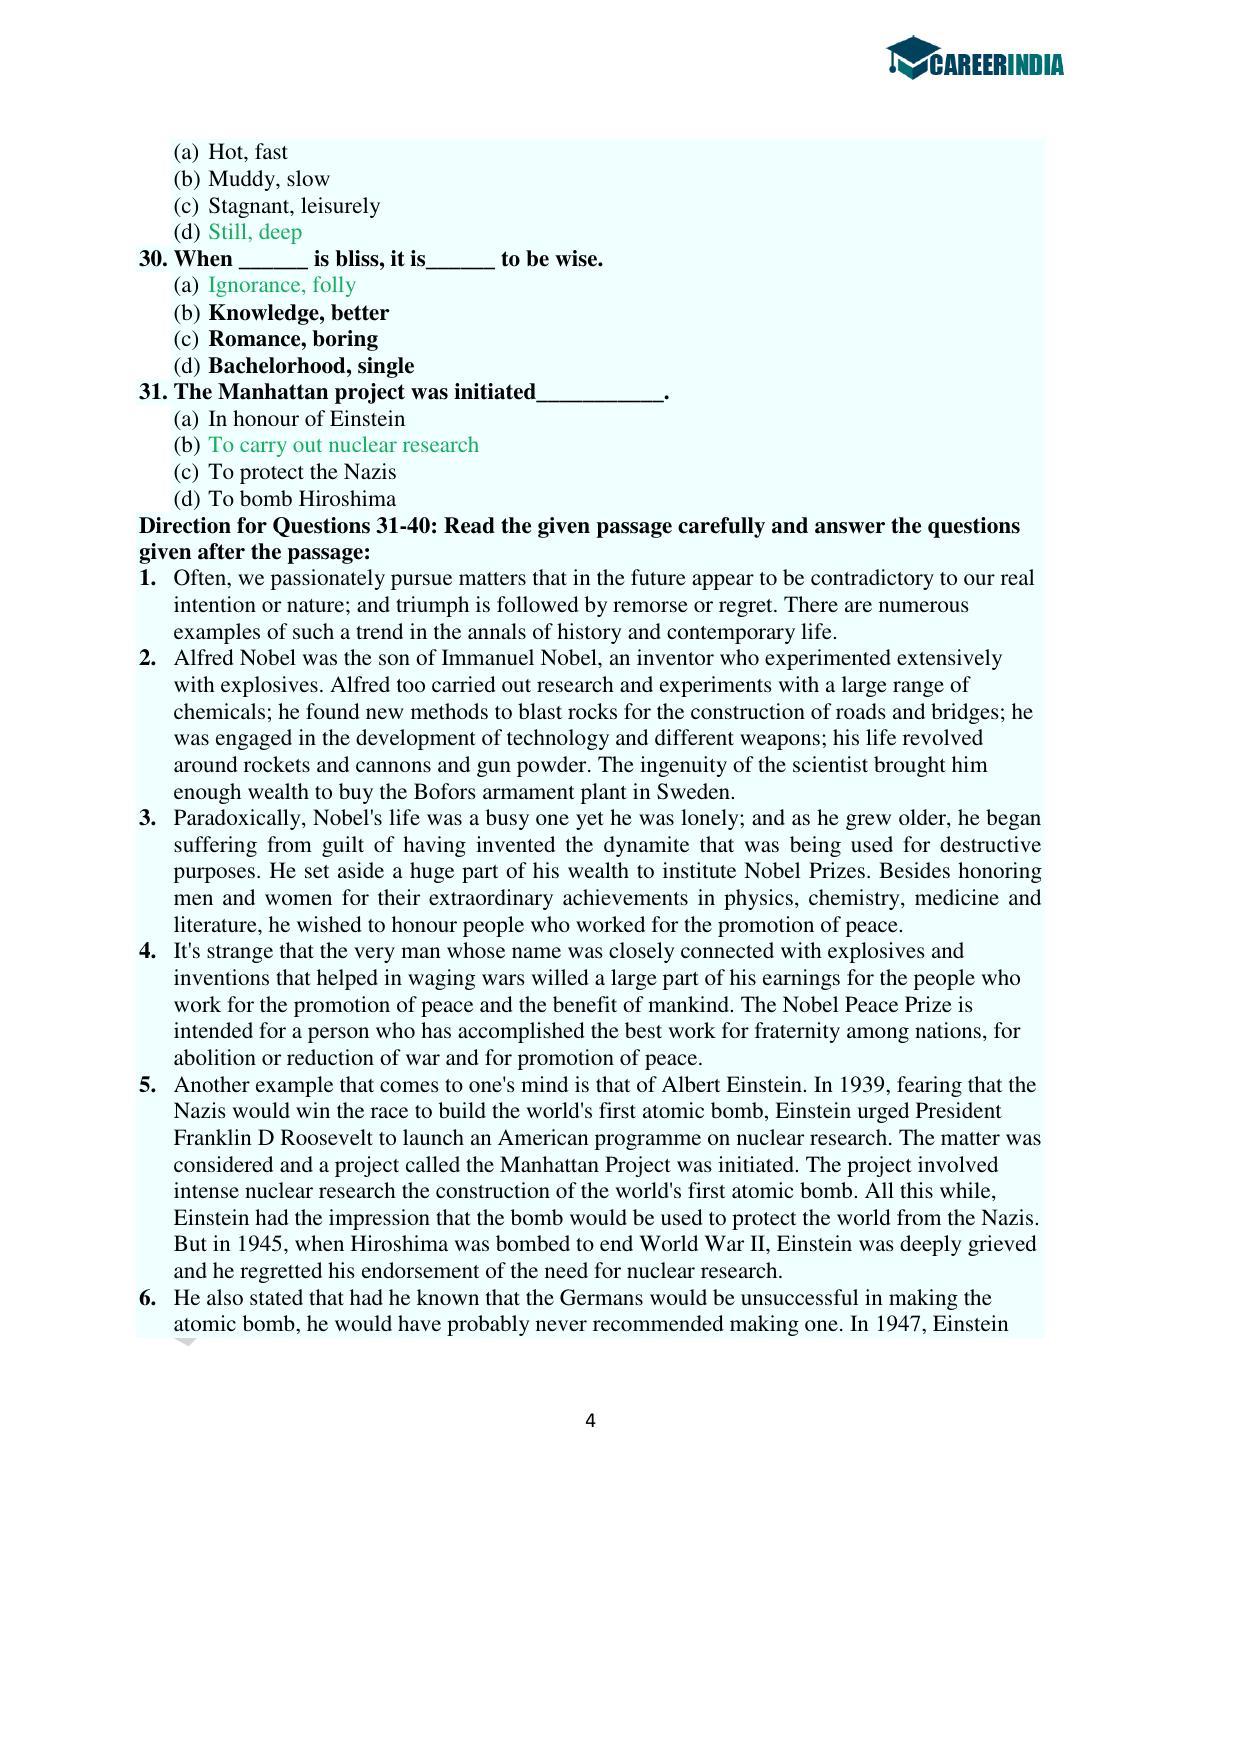 CLAT 2016 UG Question Paper with Answer Key - Page 4